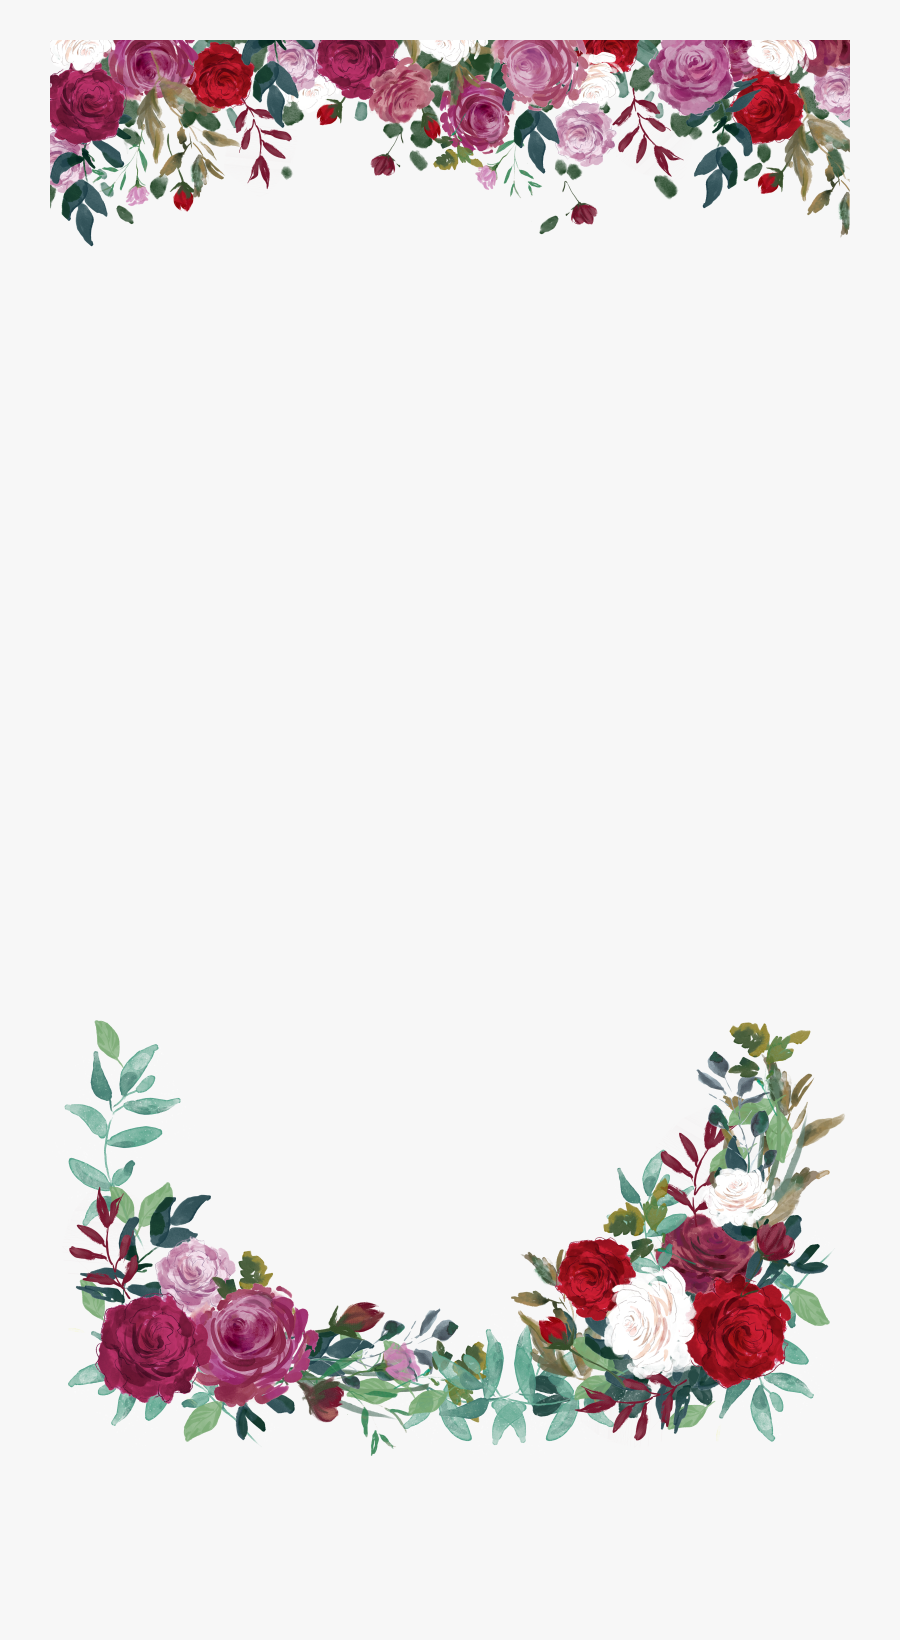 Snapchat Filters Clipart Rose - Snapchat Wedding Geofilter Png, Transparent Clipart